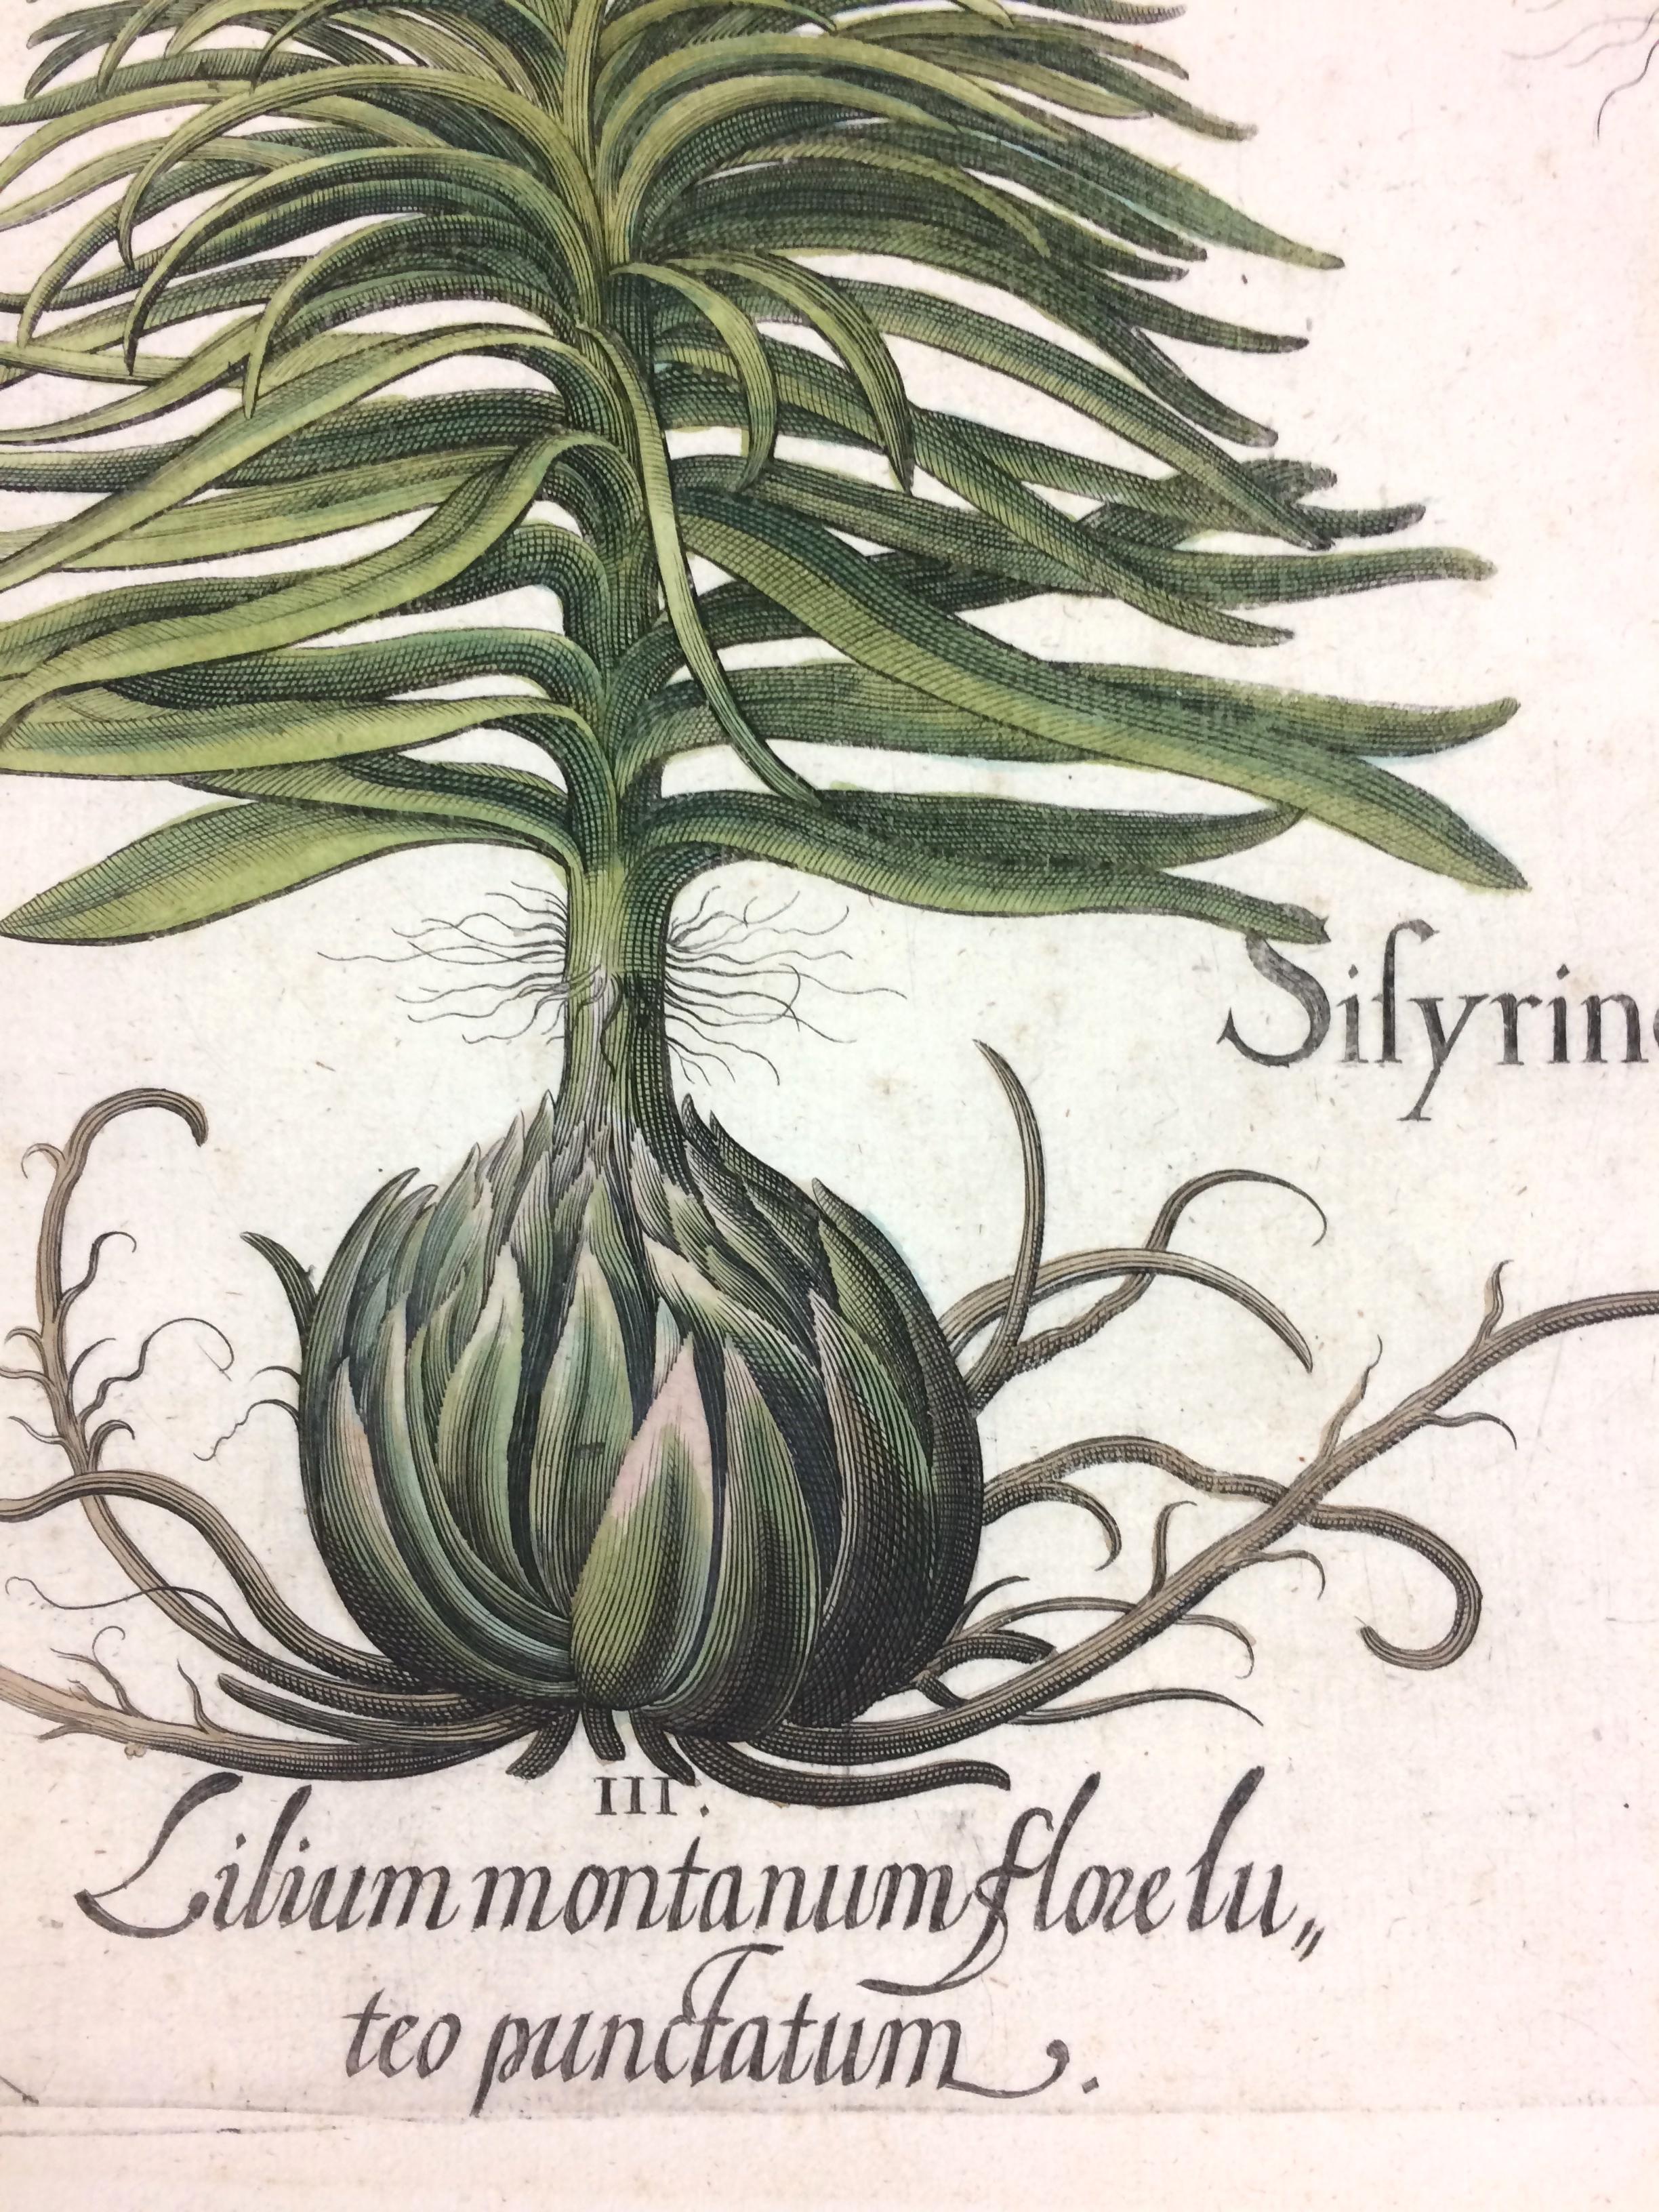 Original Hand colored engraving Botanical Mountain Lily.
Basilius Besler (1561–1629) was a respected Nuremberg apothecary and botanist, best known for his monumental Hortus Eystettensis. He was the curator of the garden of Johann Konrad